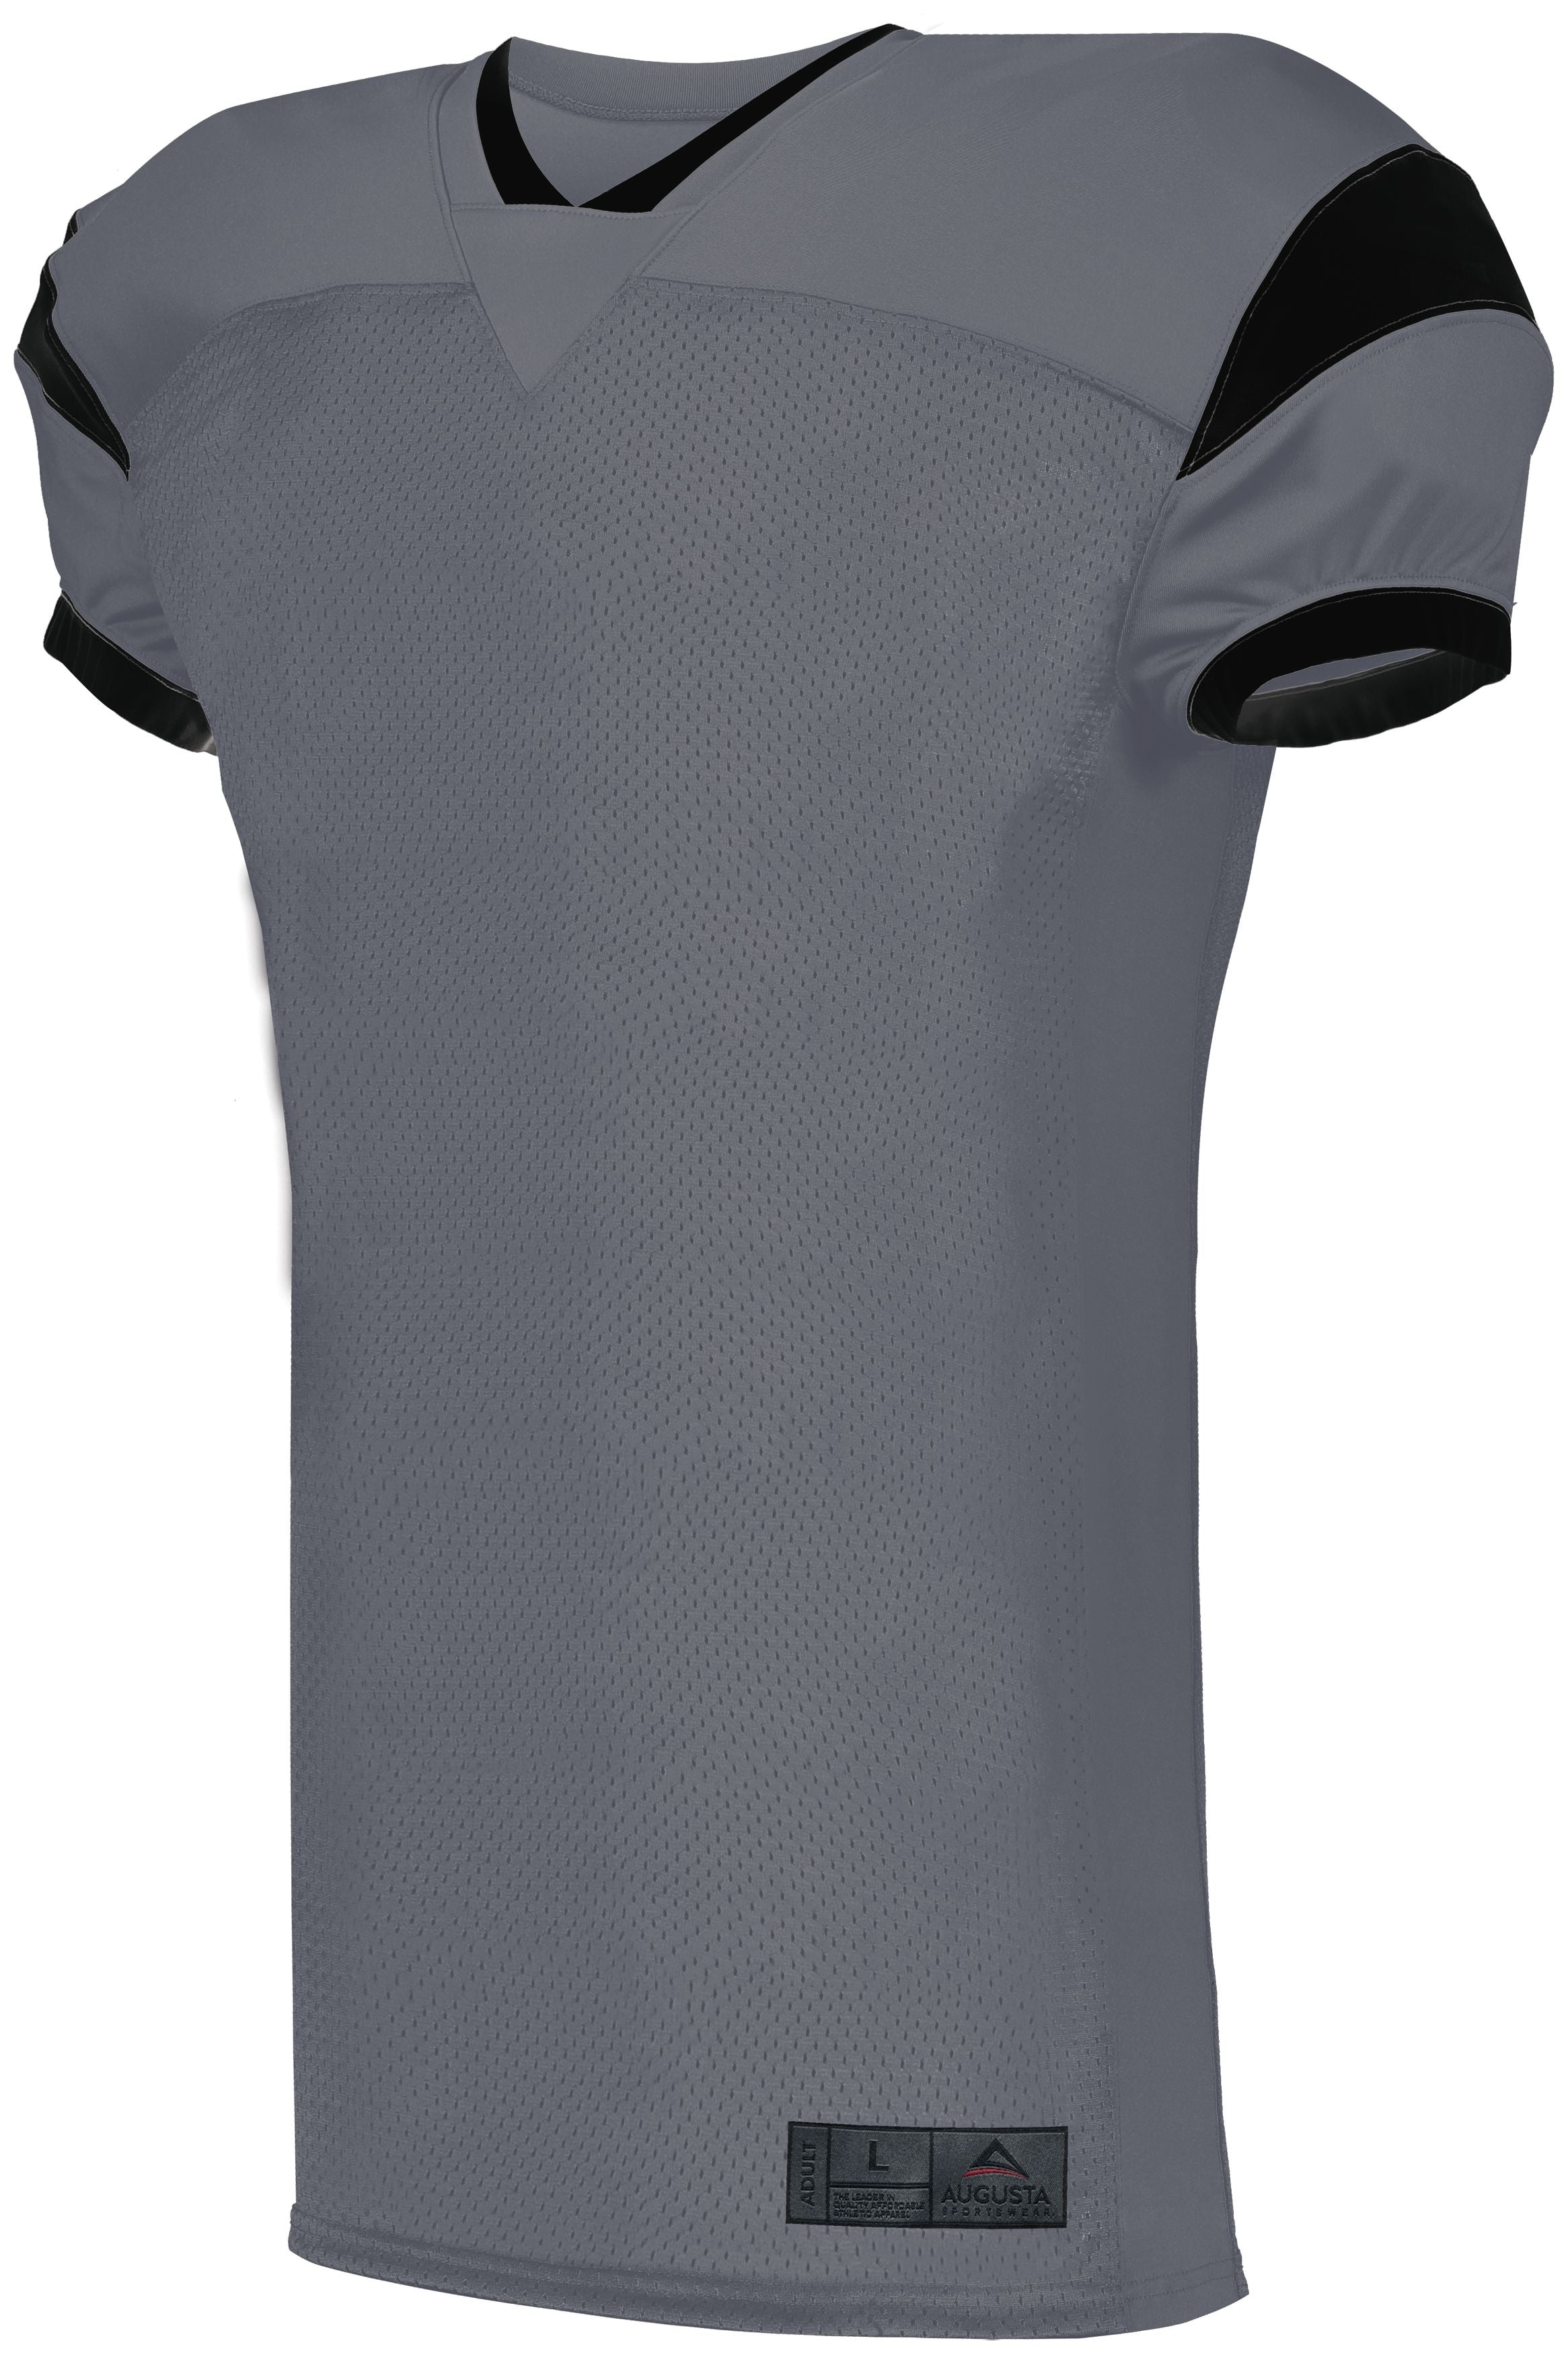 Augusta Sportswear Slant Football Jersey in Graphite/Black  -Part of the Adult, Adult-Jersey, Augusta-Products, Football, Shirts, All-Sports, All-Sports-1 product lines at KanaleyCreations.com